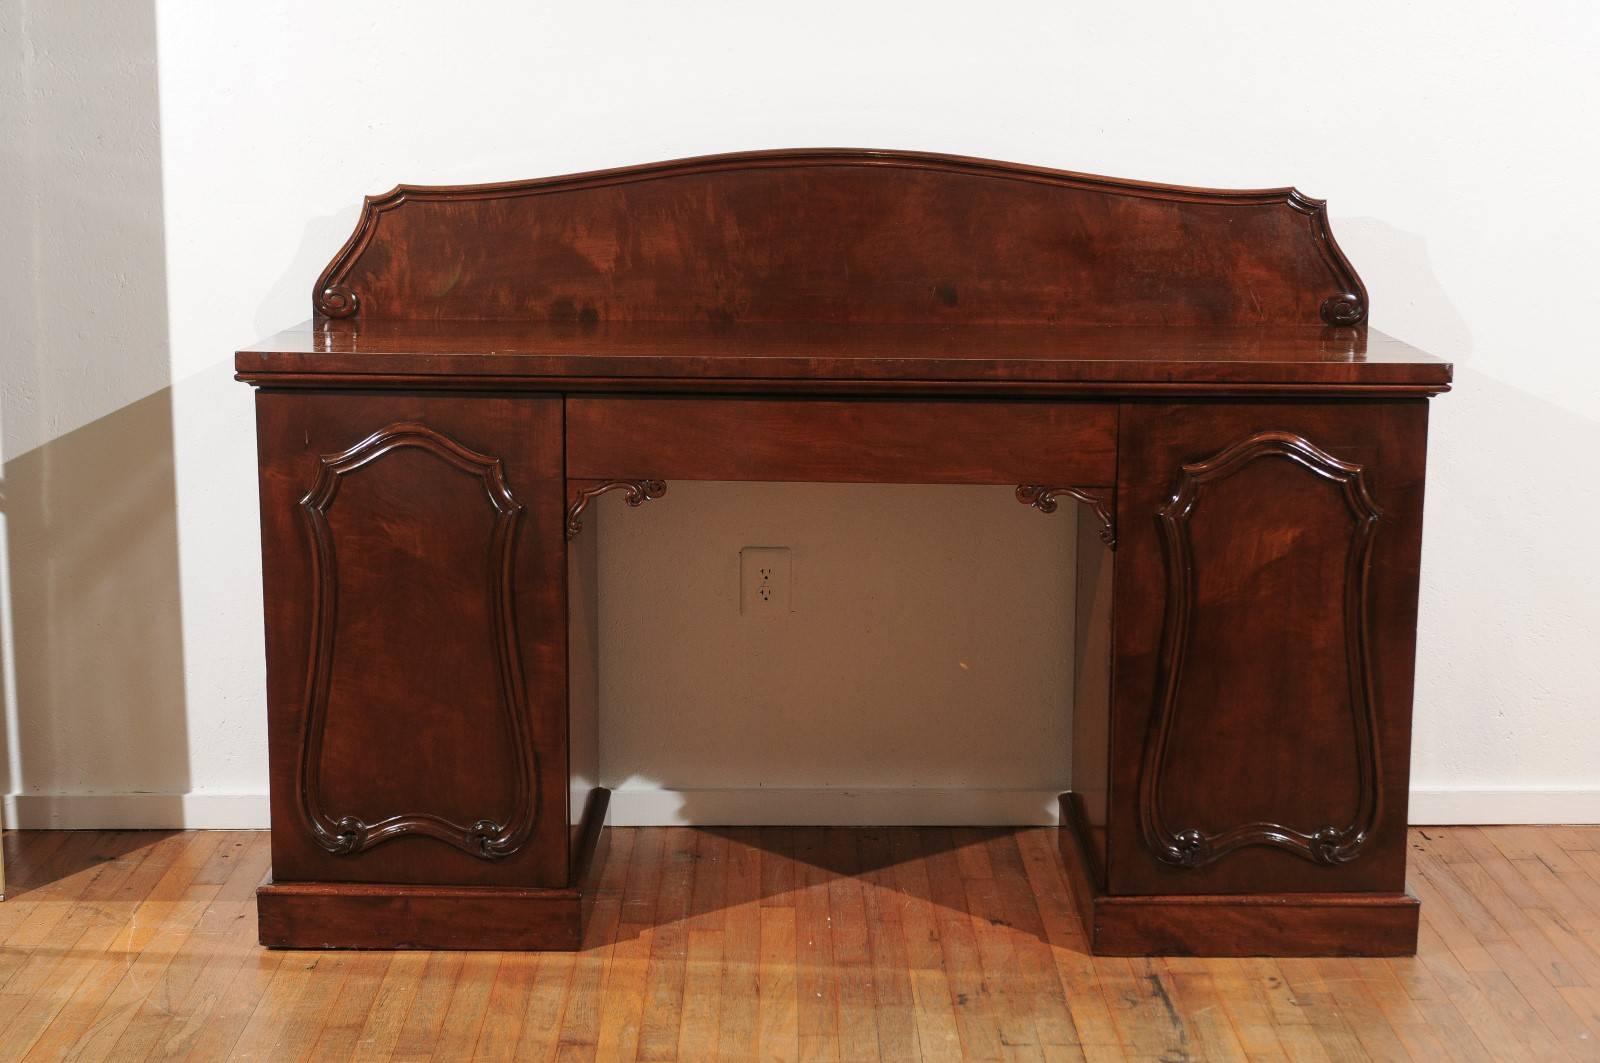 19th century sideboard of mahogany in the style of William IV. The sideboard has a thick mahogany top holding a wide drawer in its frieze, and is supported by two pedestals standing on plinth bases. Each pedestal has a door with carved moldings and